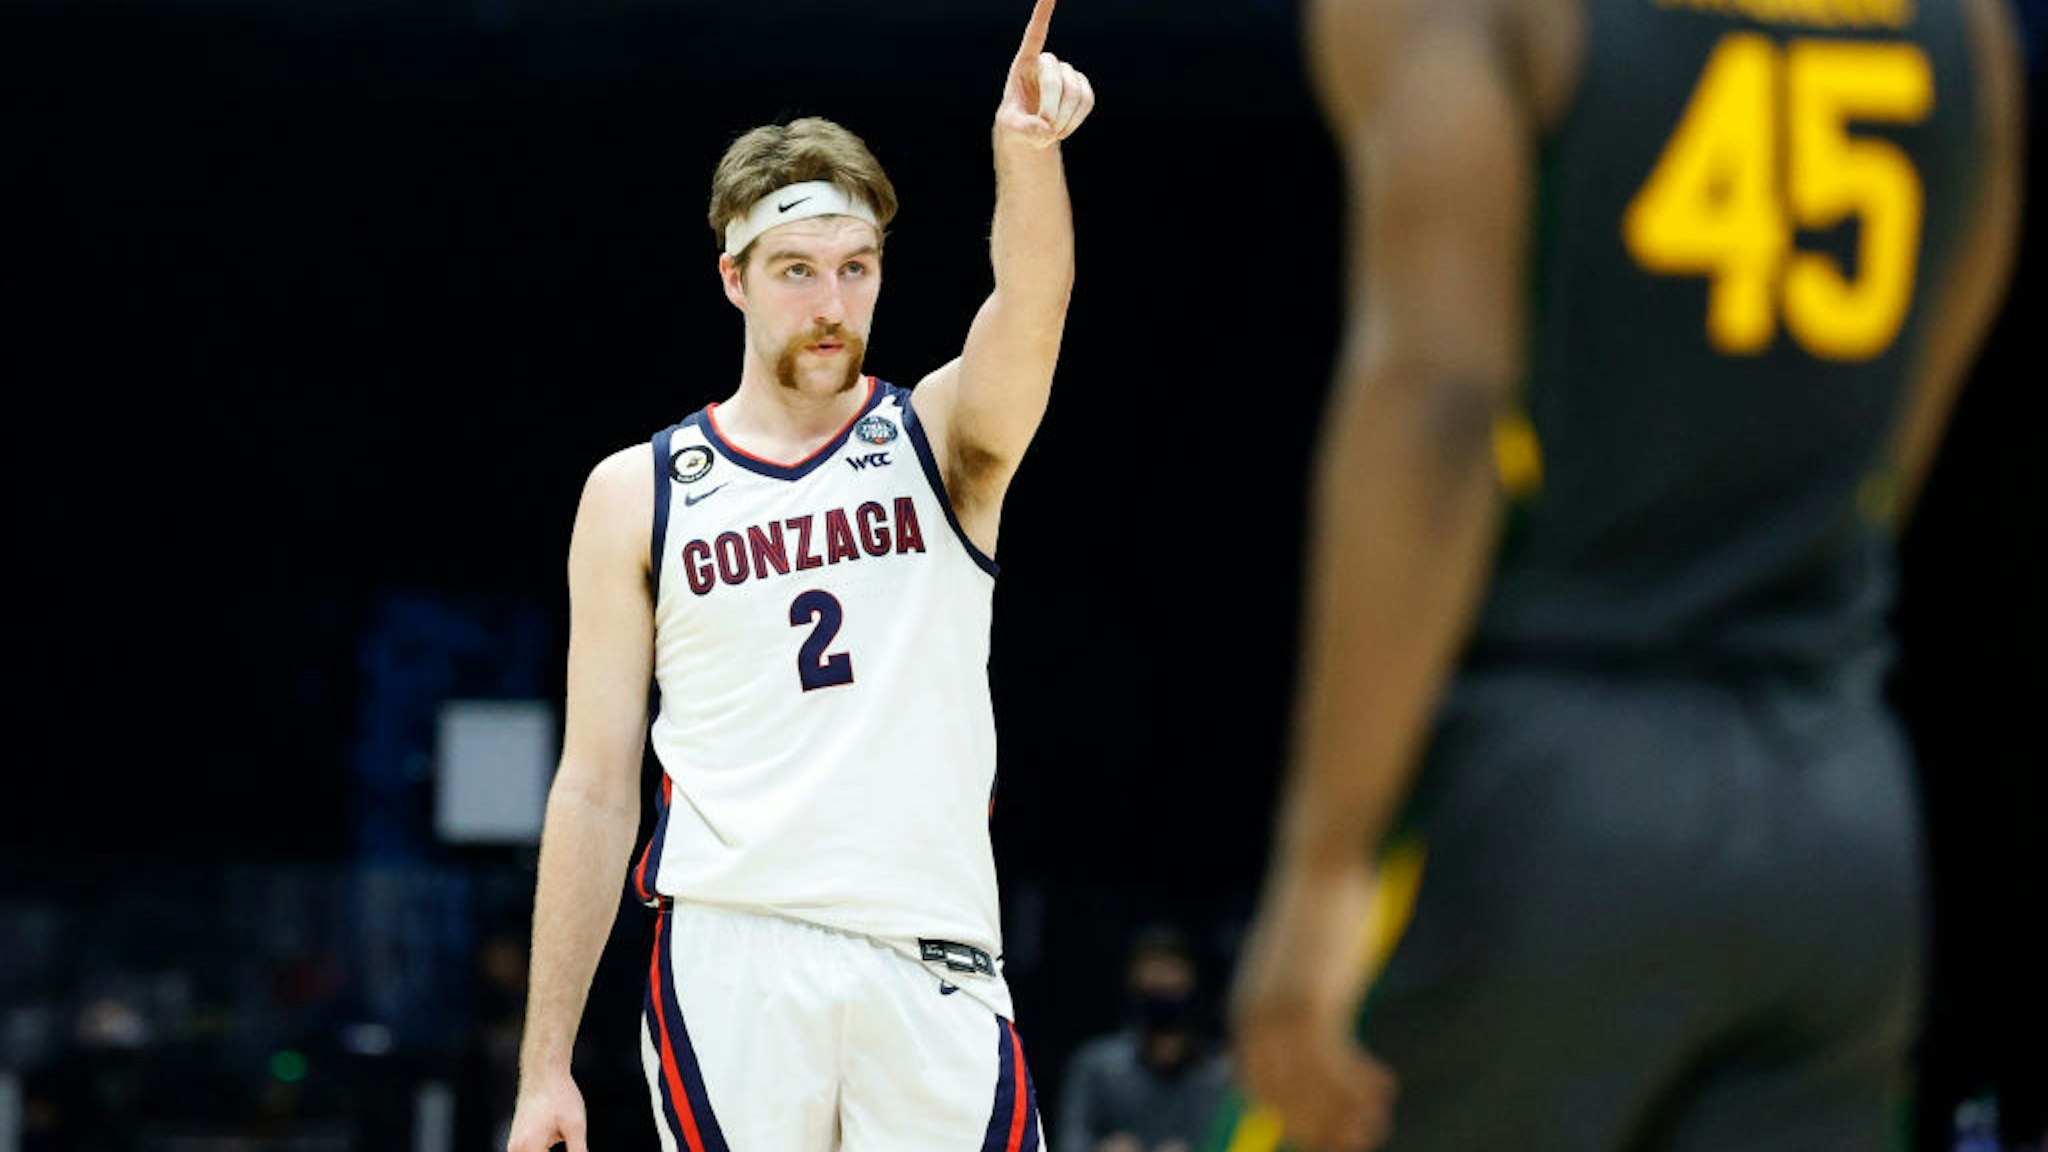 INDIANAPOLIS, INDIANA - APRIL 05: Drew Timme #2 of the Gonzaga Bulldogs reacts during the first half in the National Championship game of the 2021 NCAA Men's Basketball Tournament against the Baylor Bears at Lucas Oil Stadium on April 05, 2021 in Indianapolis, Indiana. (Photo by Tim Nwachukwu/Getty Images)